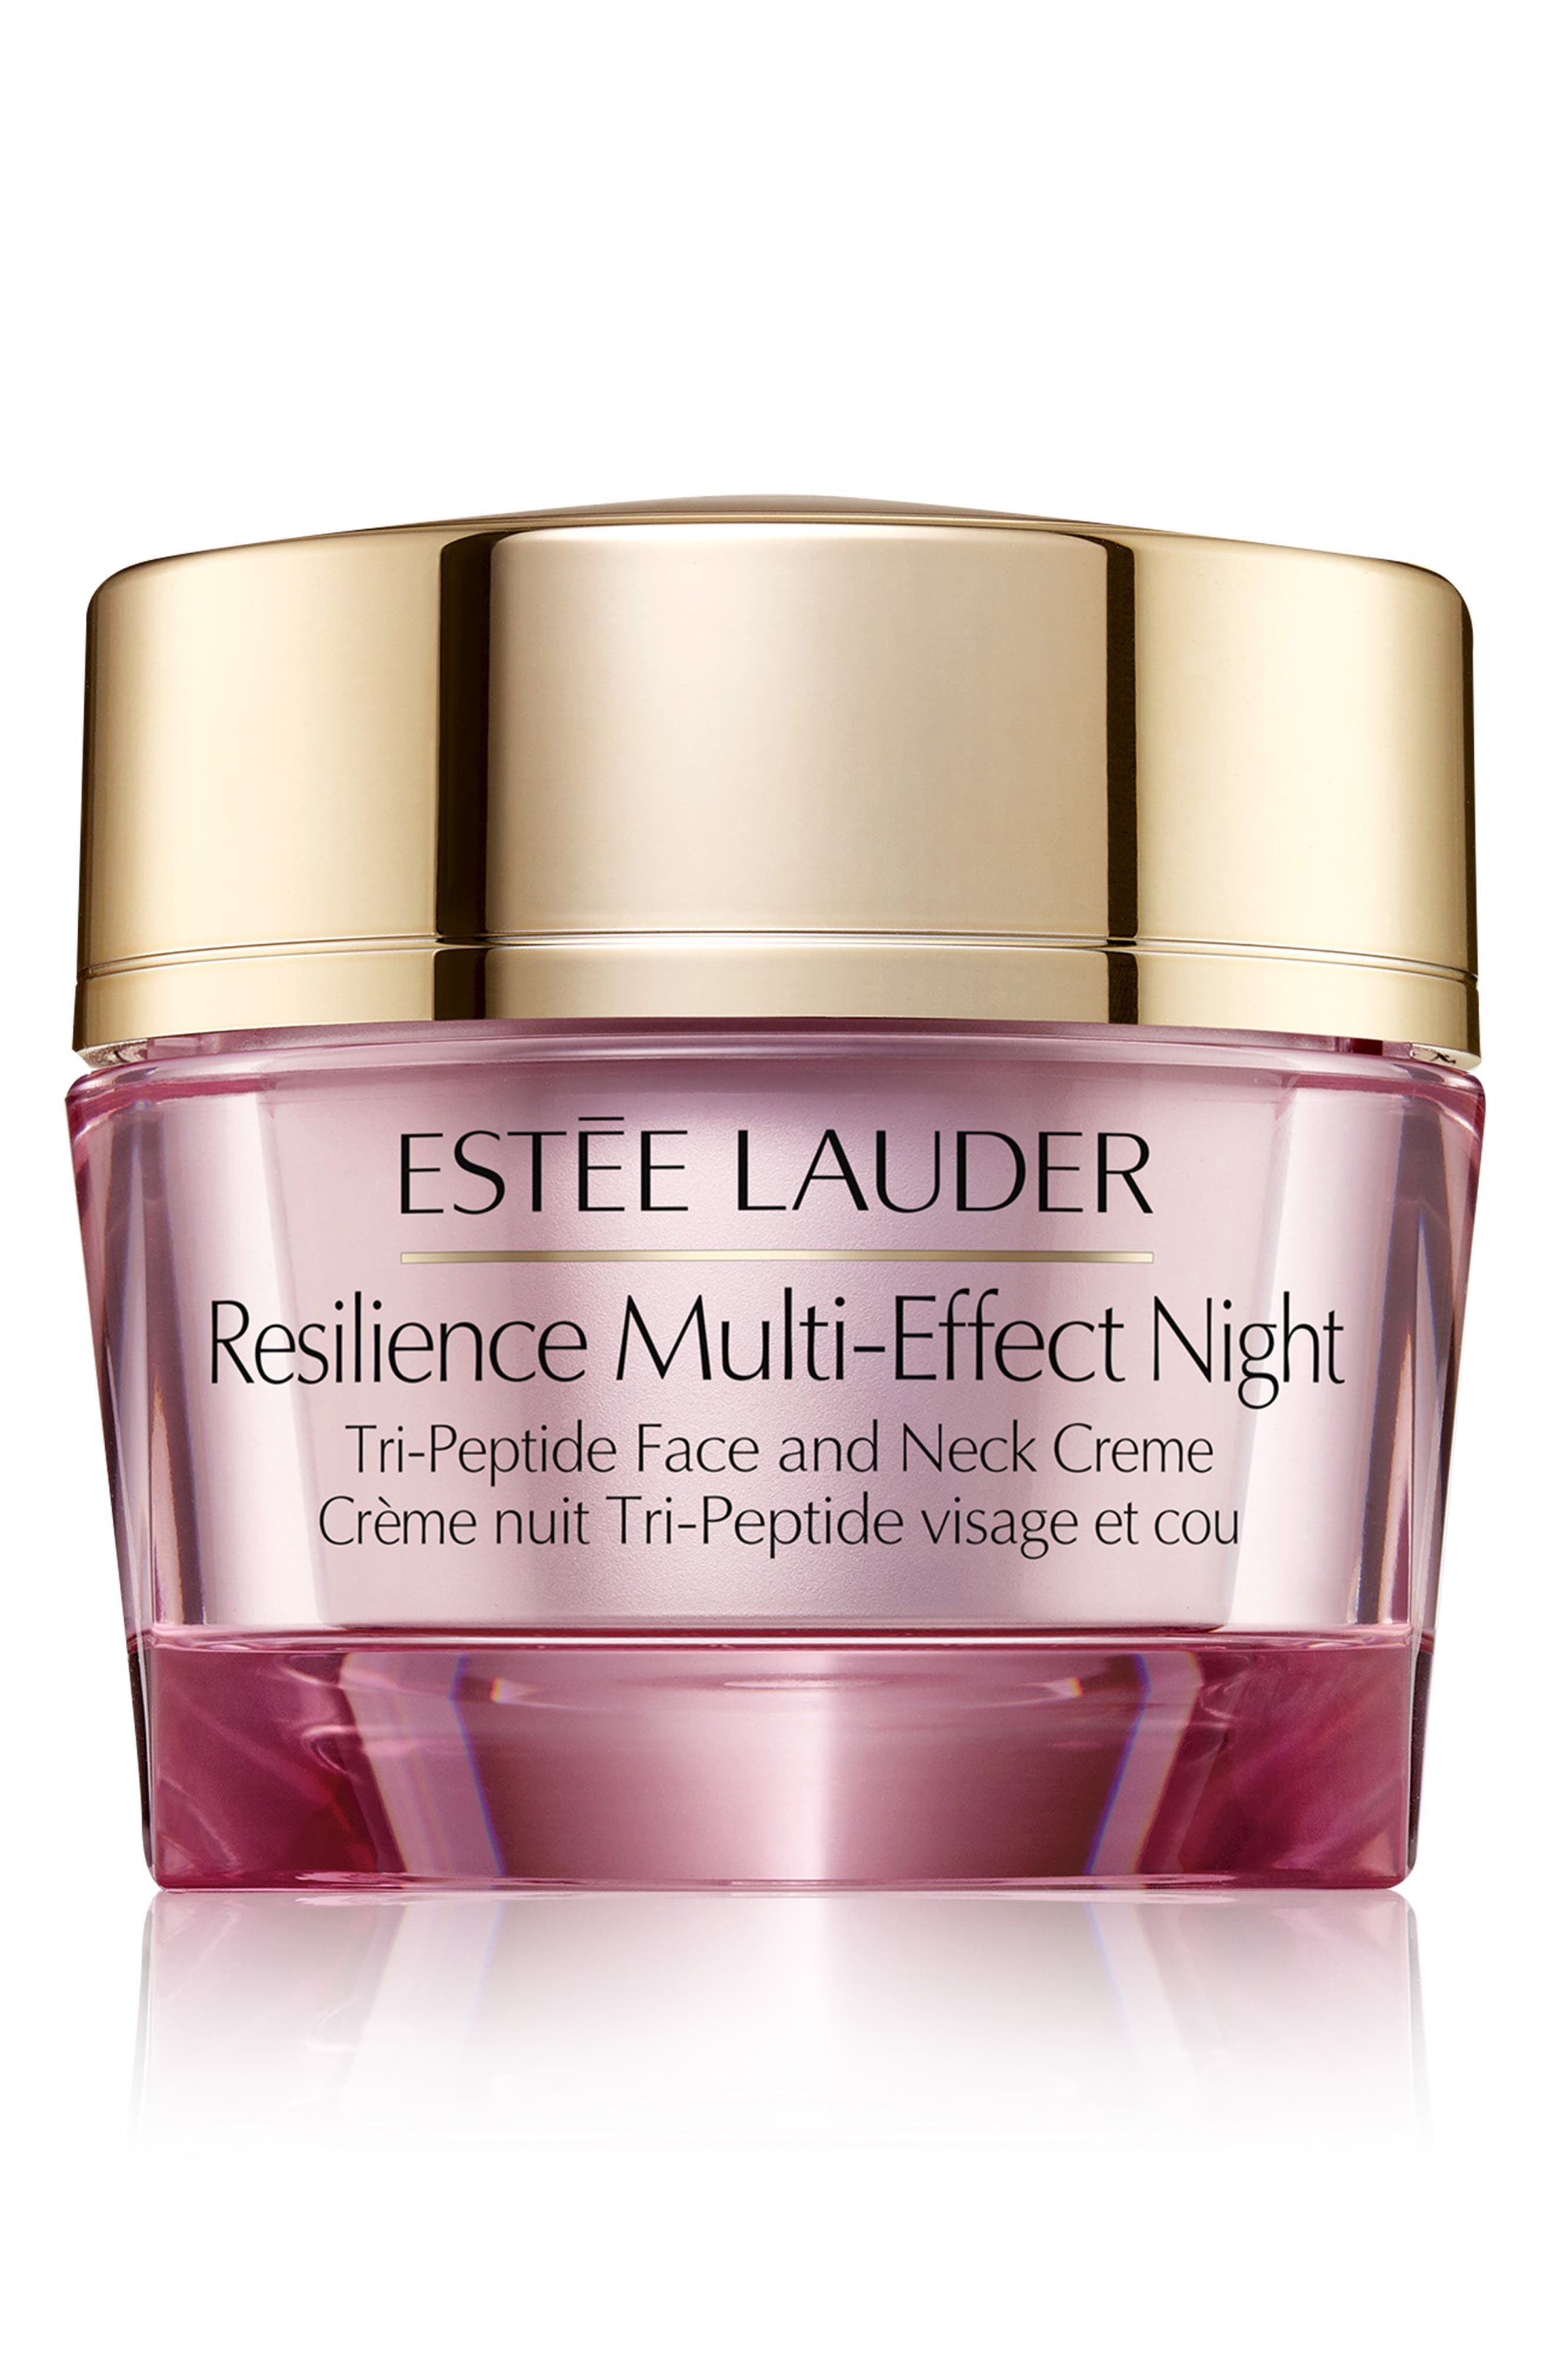 Estee Lauder Resilience Multi-Effect Night Tri-Peptide Face and Neck Creme, Size 2.5 Oz at Nordstrom